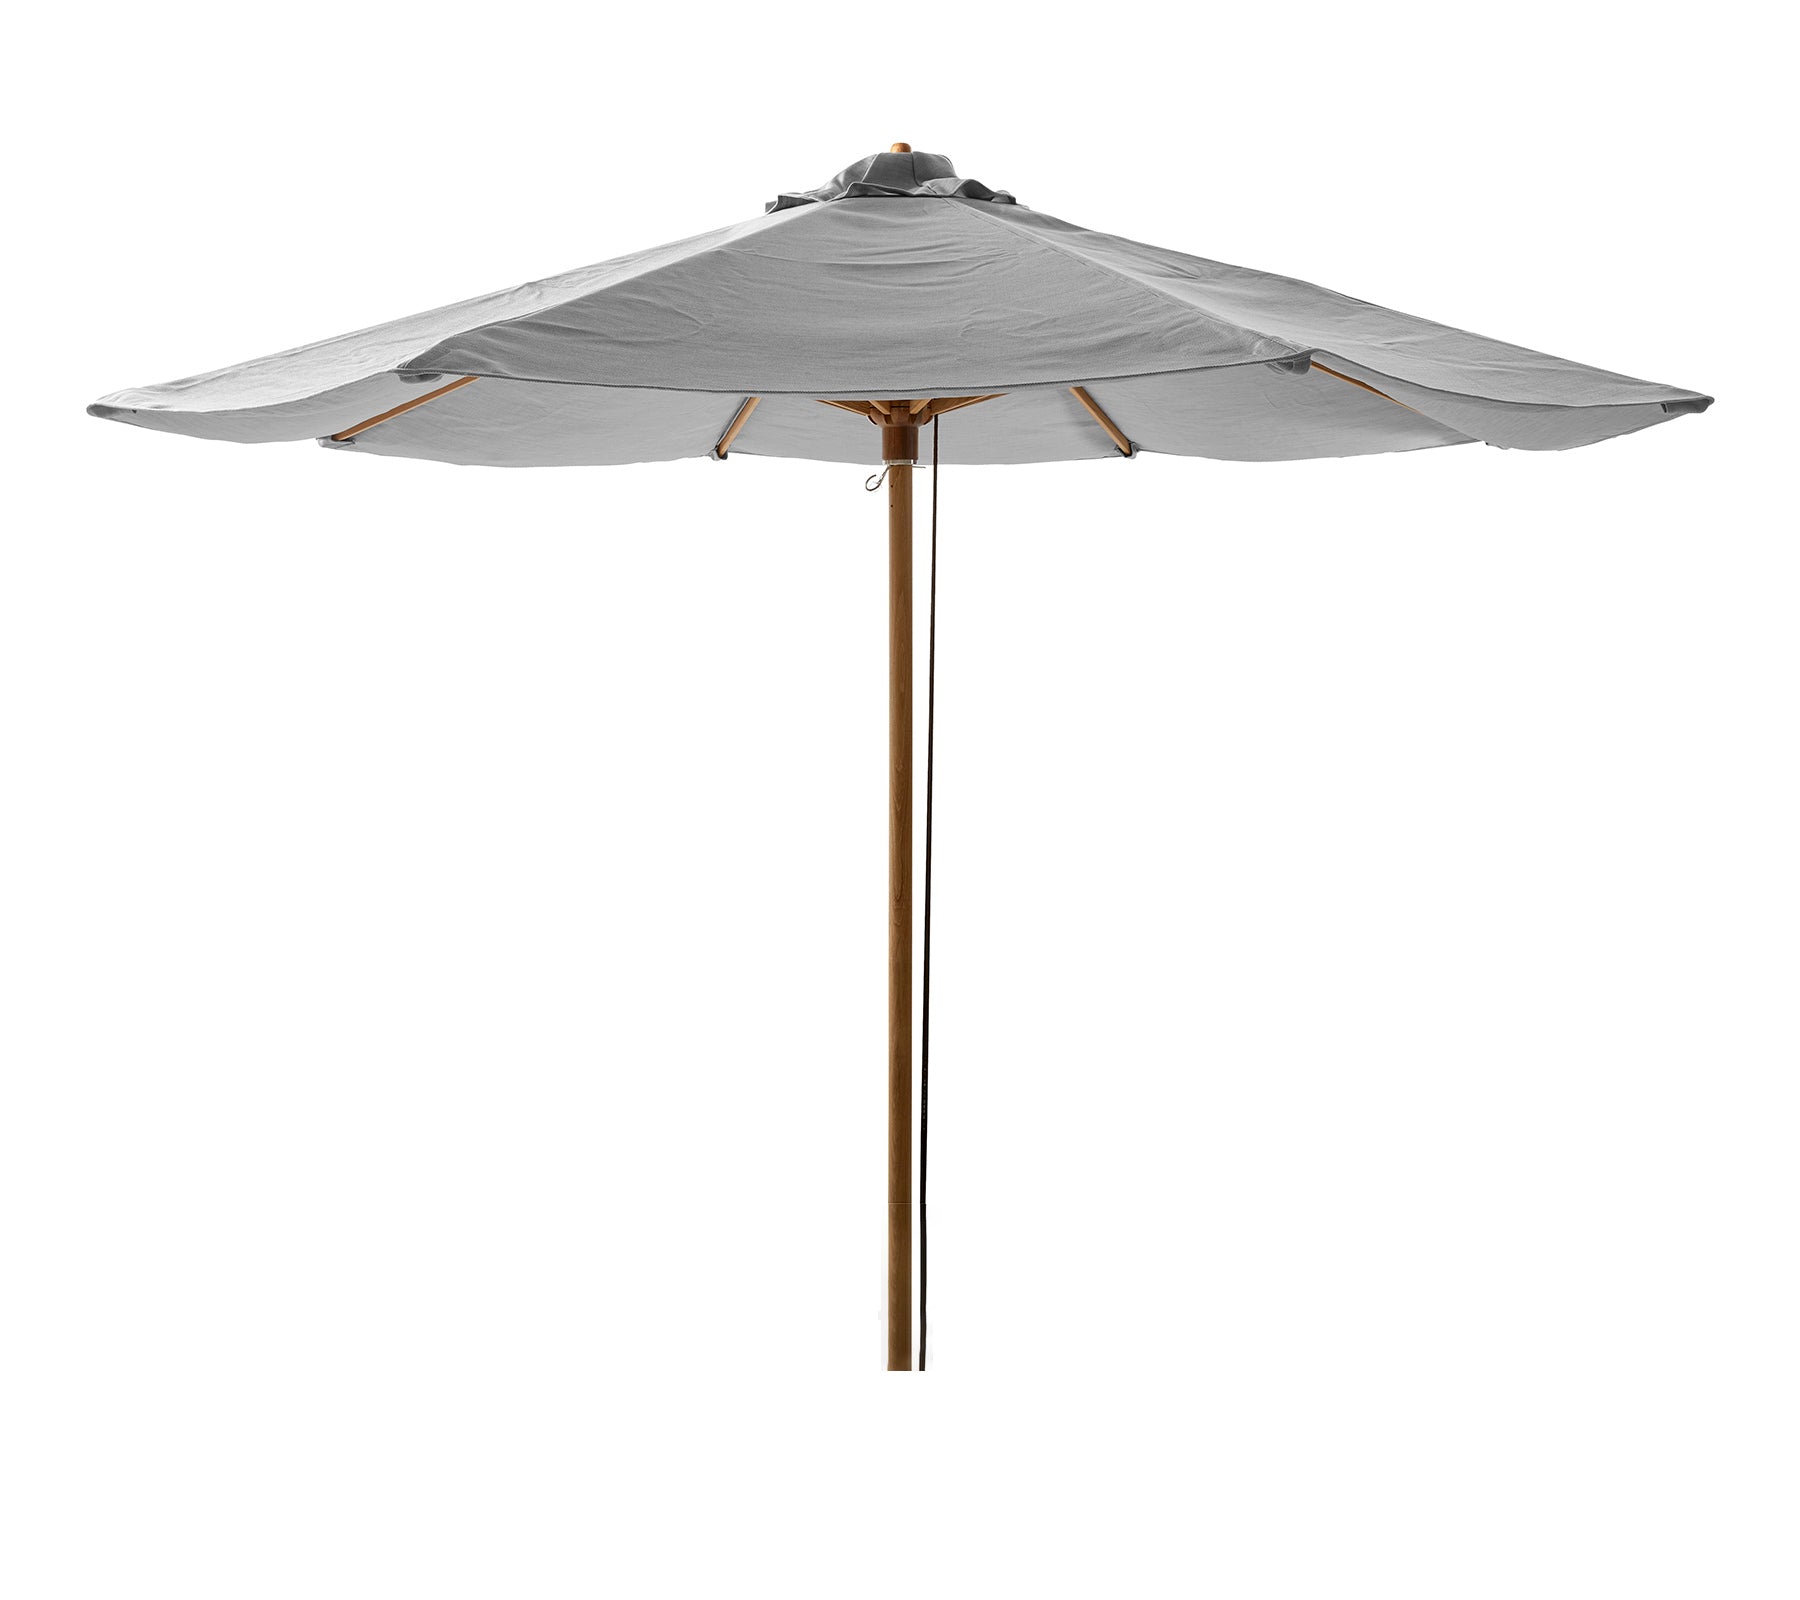 Cane-line Classic Parasol W/Pulley System Dia 3 M 59300TY506